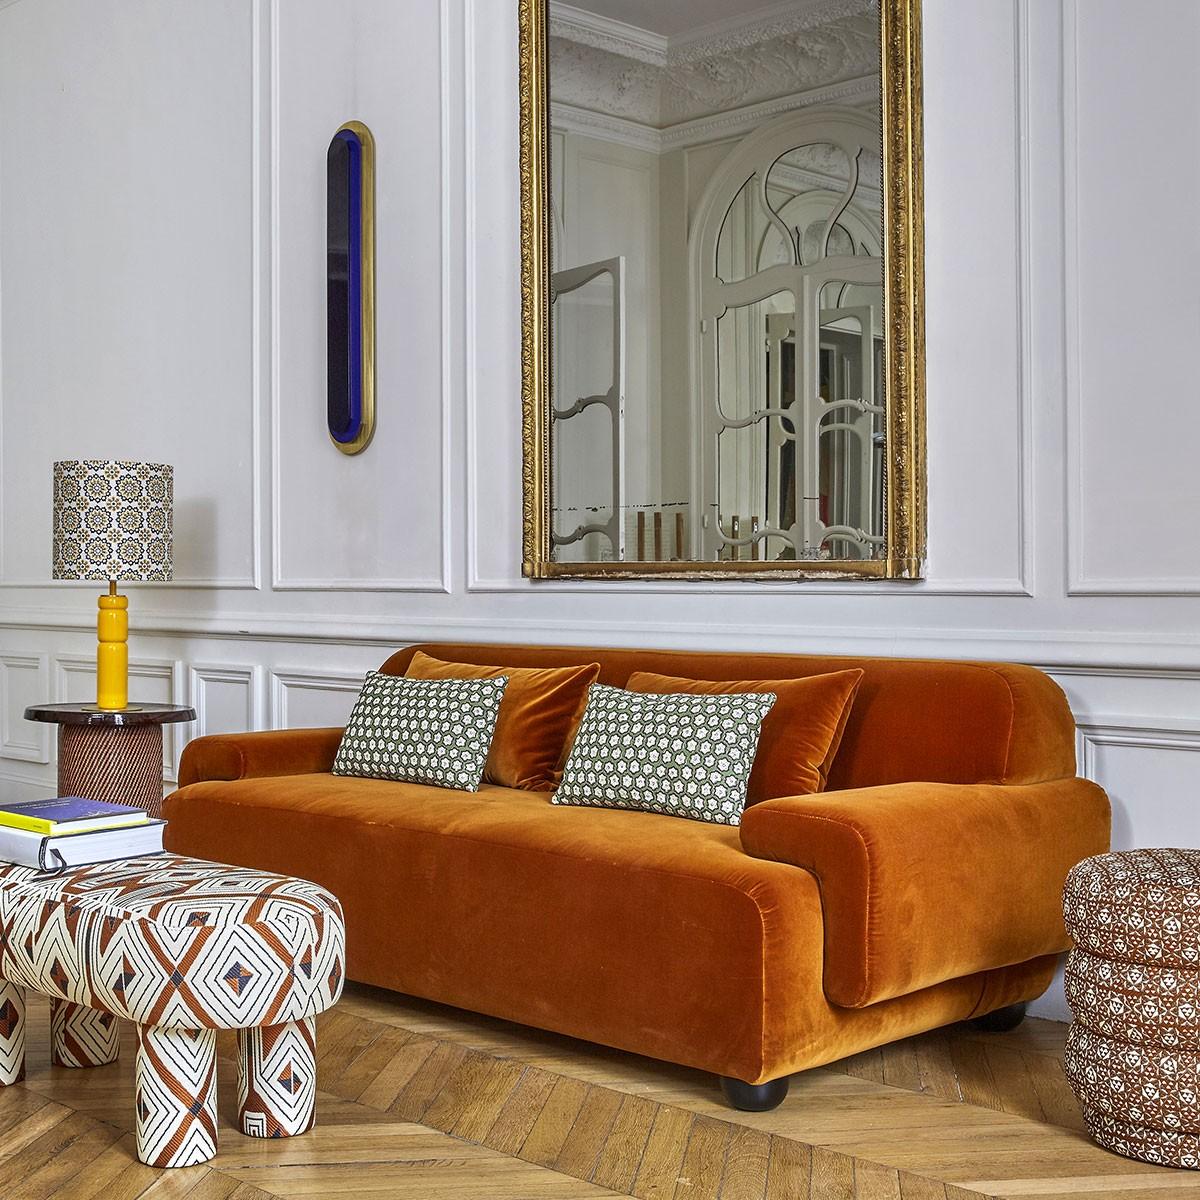 Popus Editions Lena 2.5 seater sofa in Apricot Cork linen upholstery

It looks like it's straight out of a movie, with its generous curves and wide armrests. It is a real invitation to spend long Sundays with the family, comfortably seated in